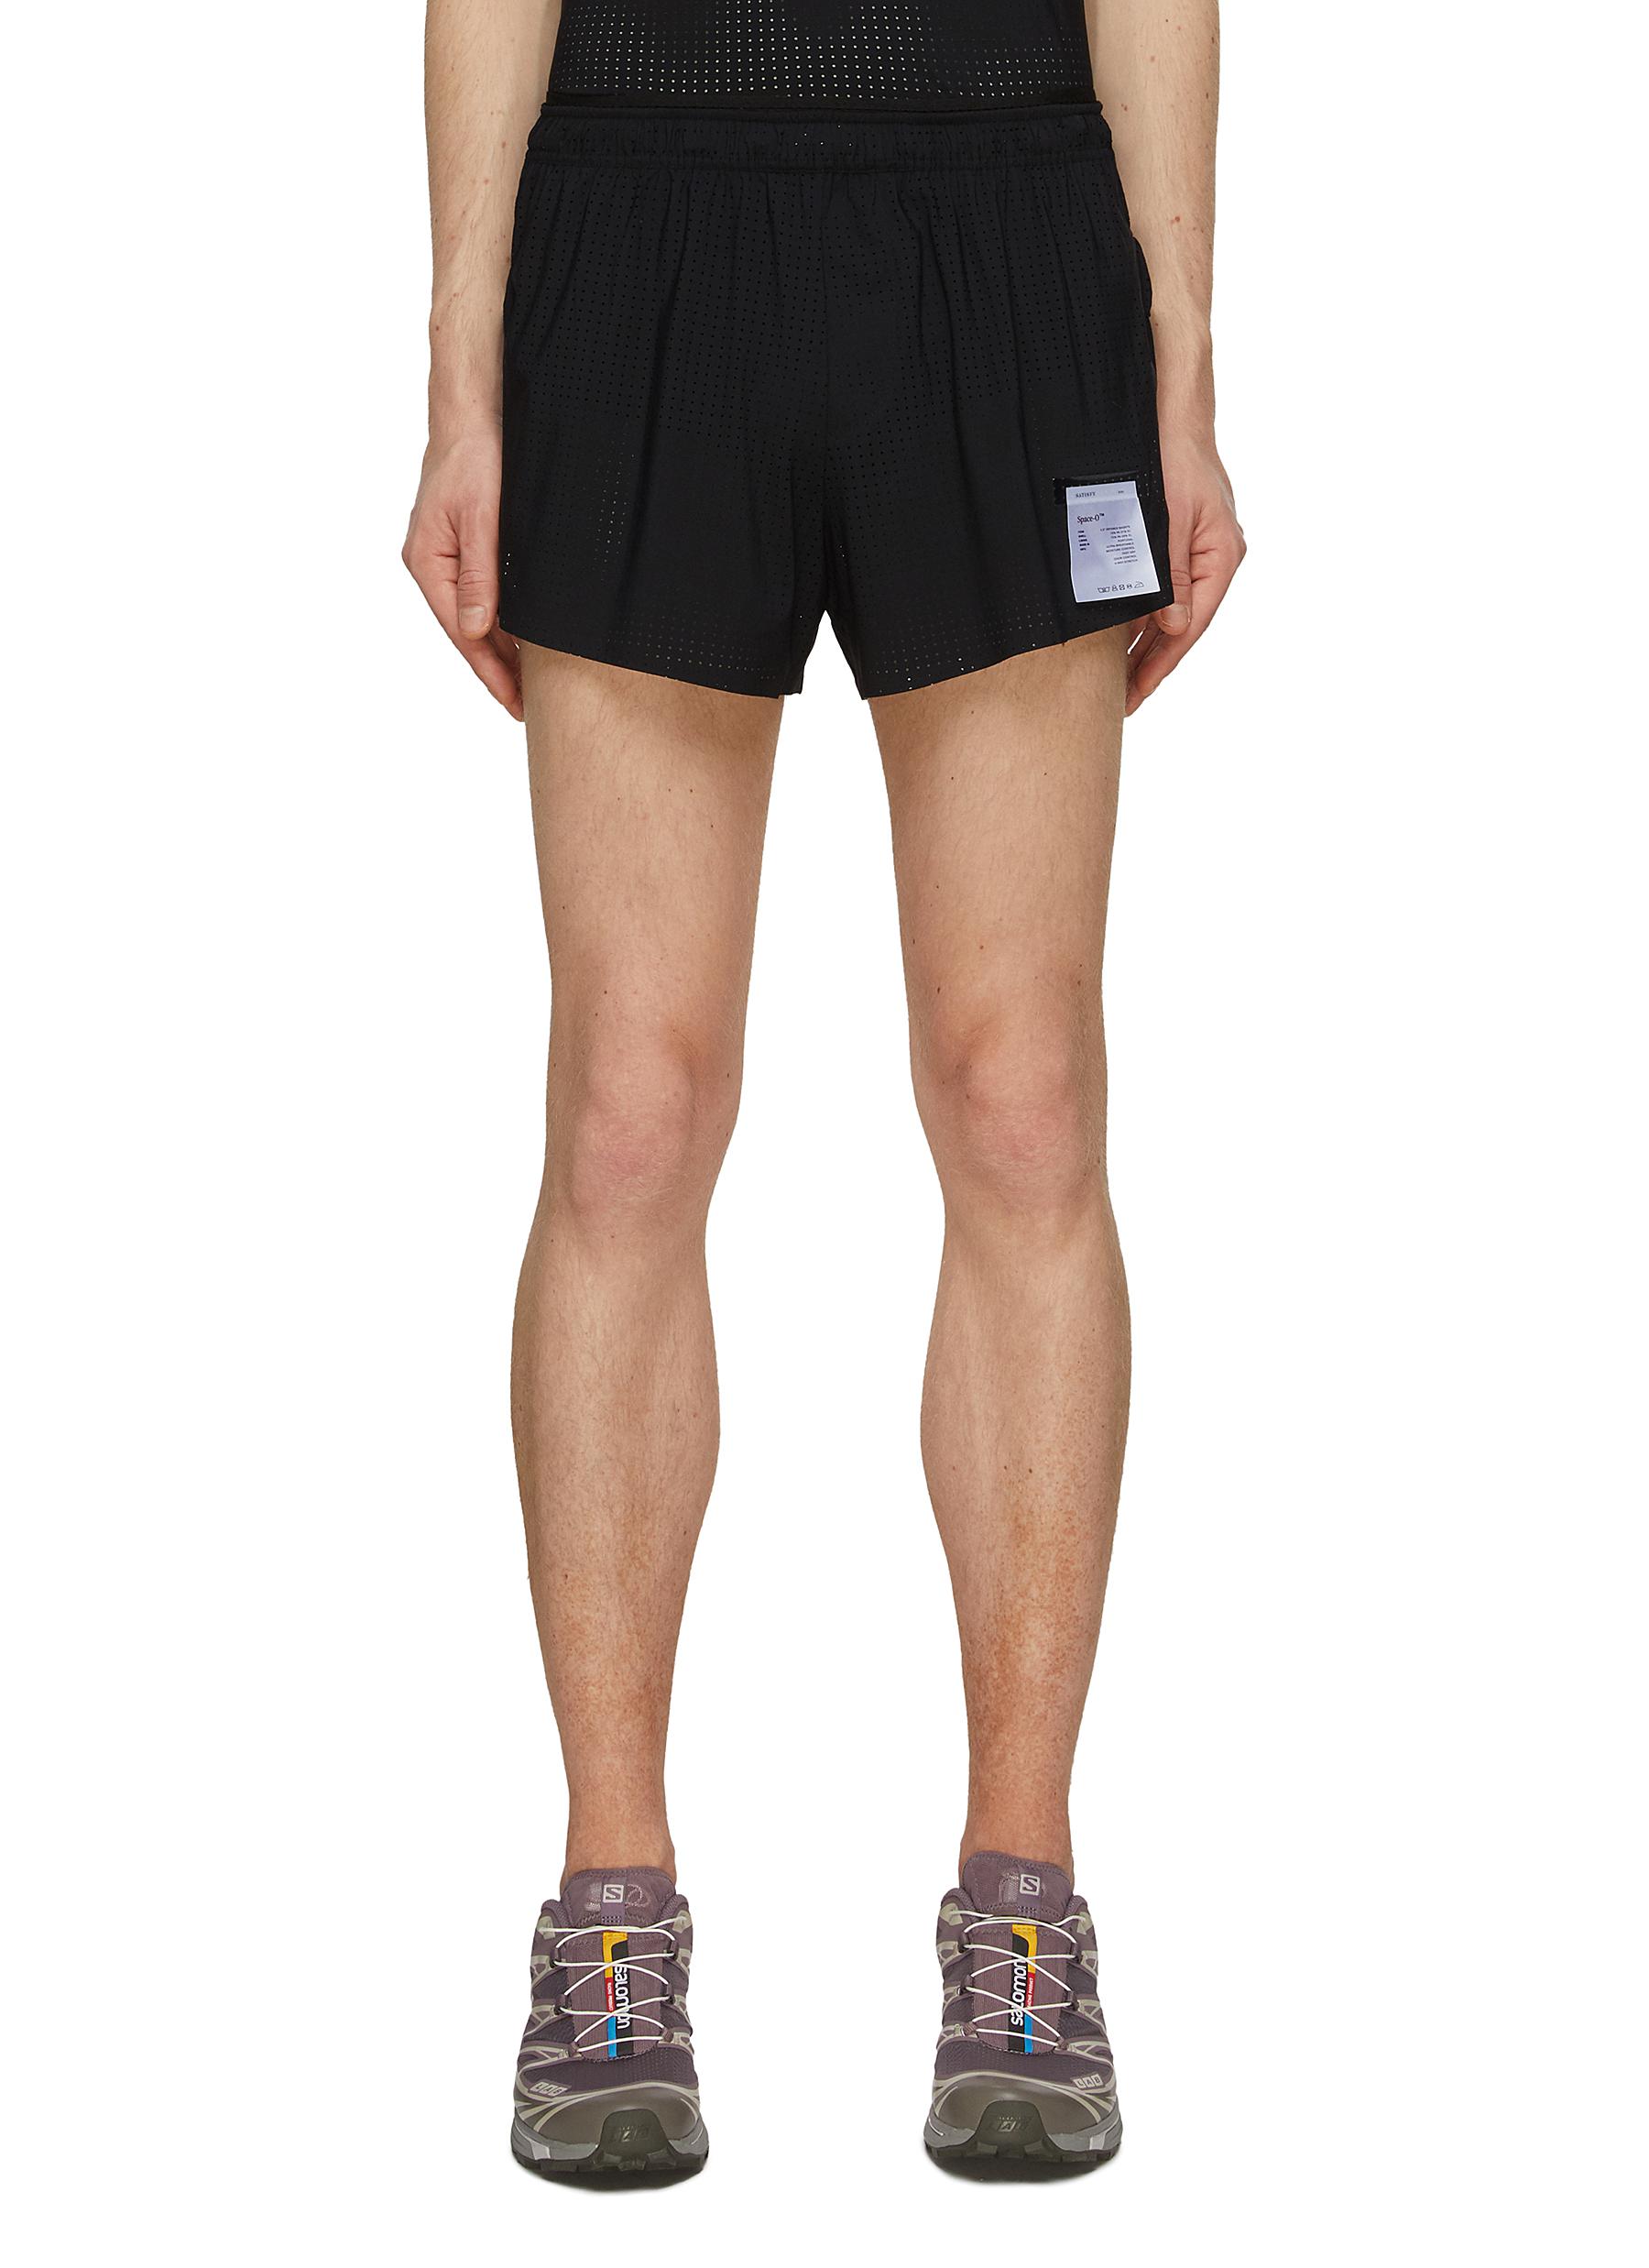 SATISFY, Space-O 2.5 Lined Distance Shorts, Men